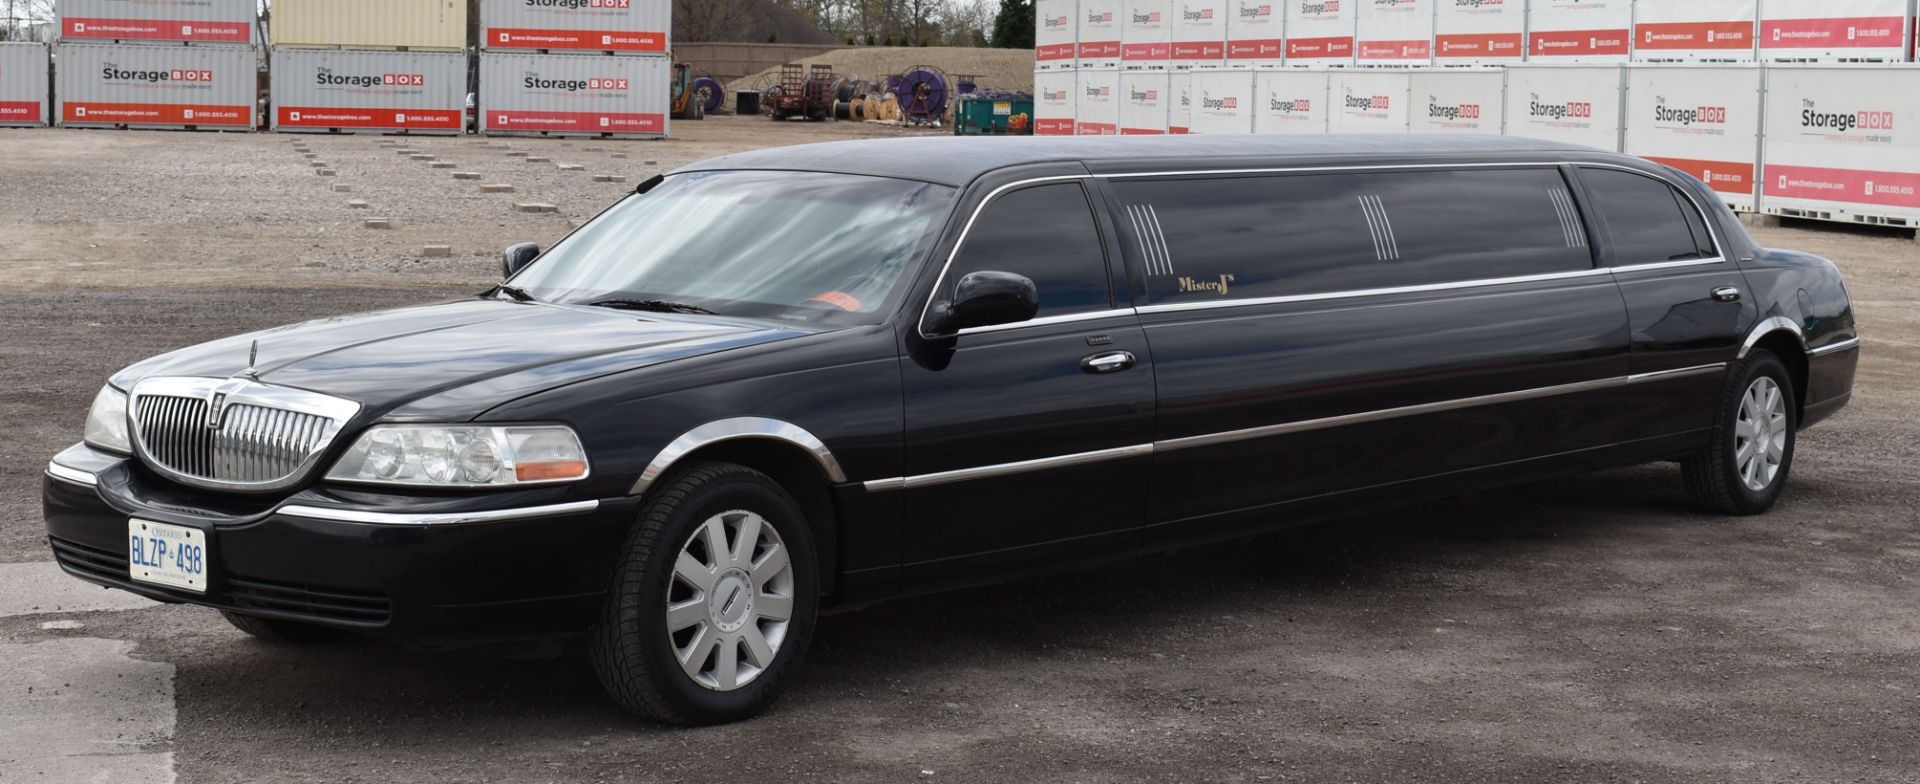 LINCOLN (2005) TOWN CAR 8 PASSENGER STRETCH LIMOUSINE WITH 8 CYLINDER 4.6L GAS ENGINE, 240,687KM (